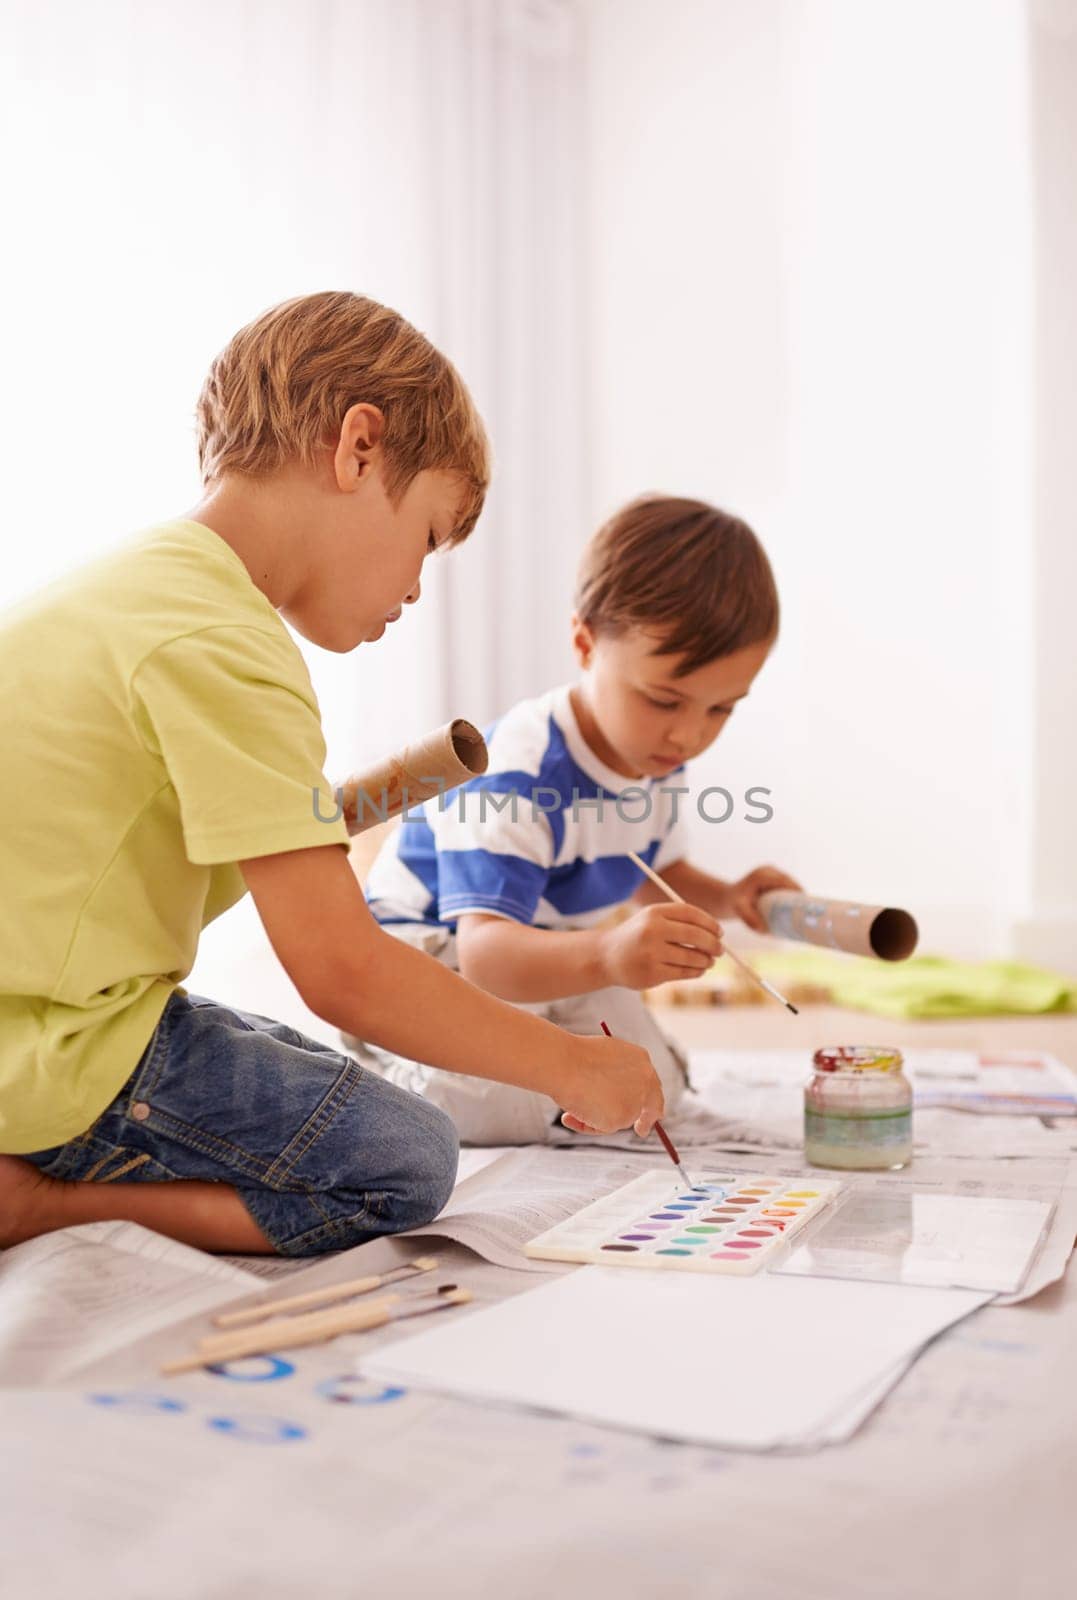 Creative, children and painting in home for development, colorful activity and fun education together. Kids, drawing and learning with paper for bonding, future artist or homework with art project.